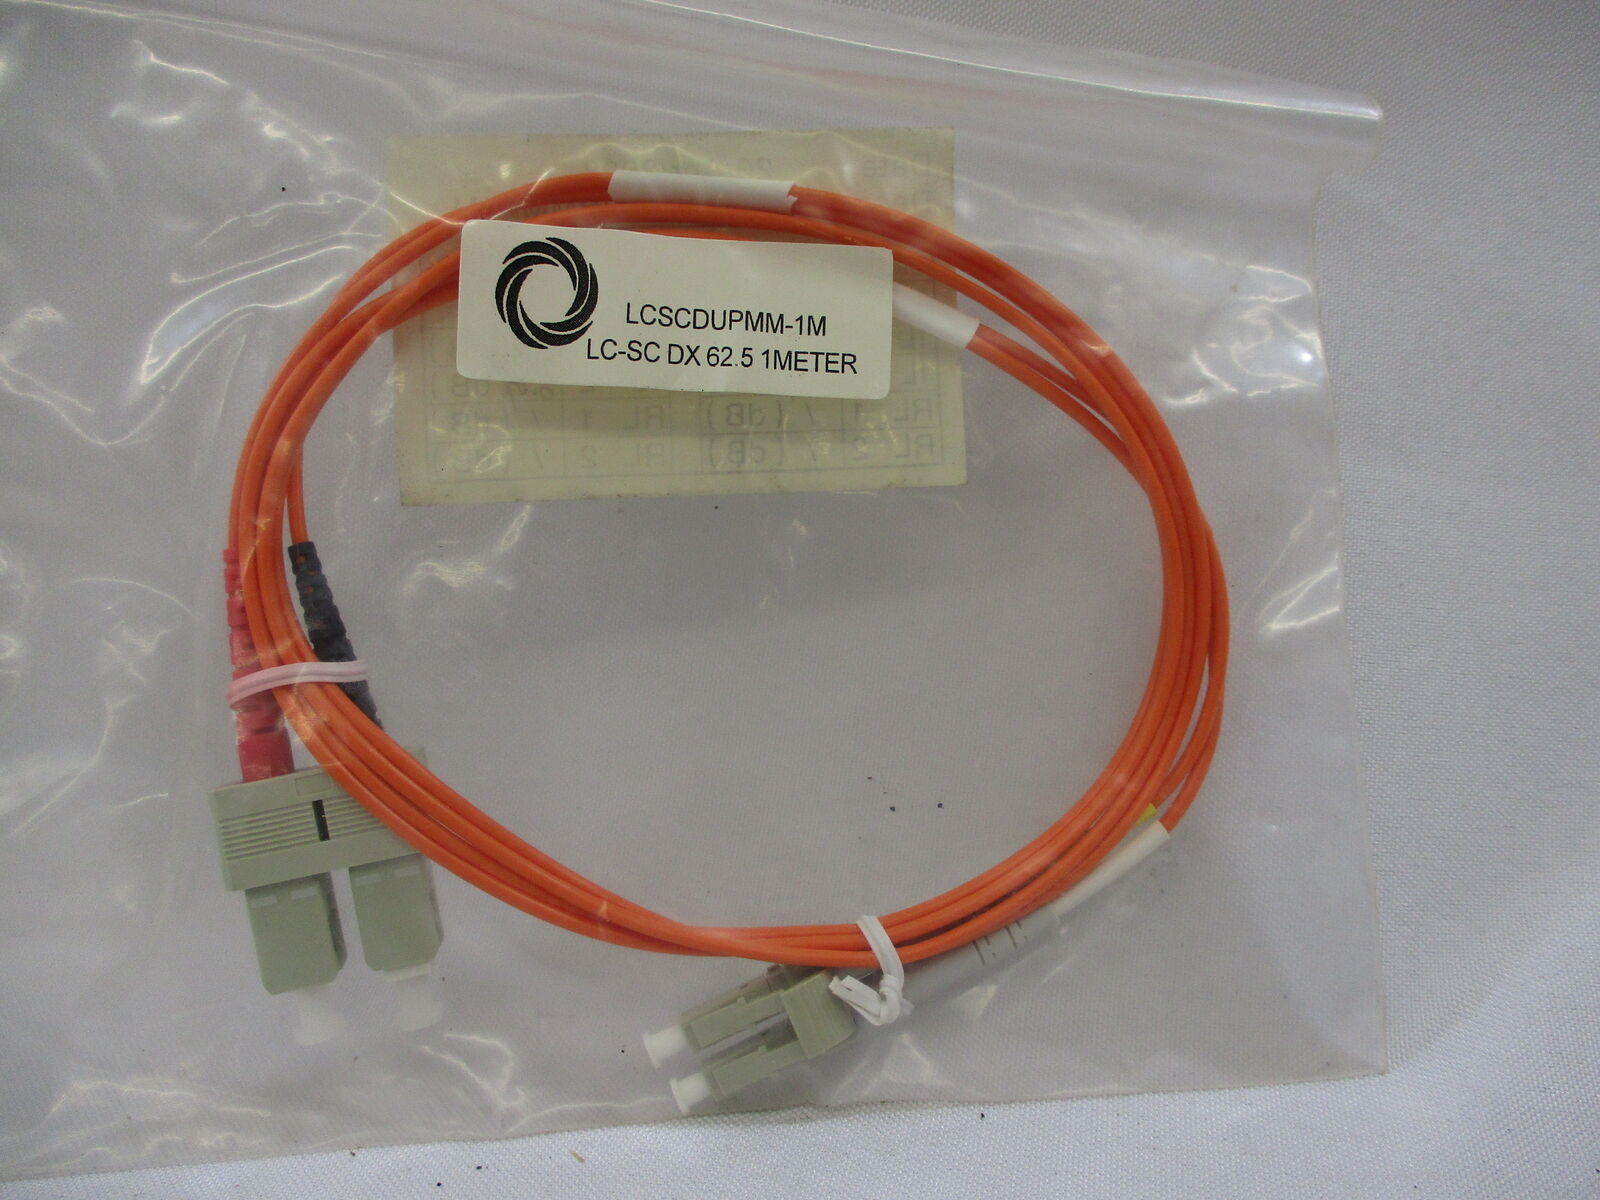 *NEW* LYNN ELECTRONICS LCSCDUPMM-1M PATCH CABLE 1 METER